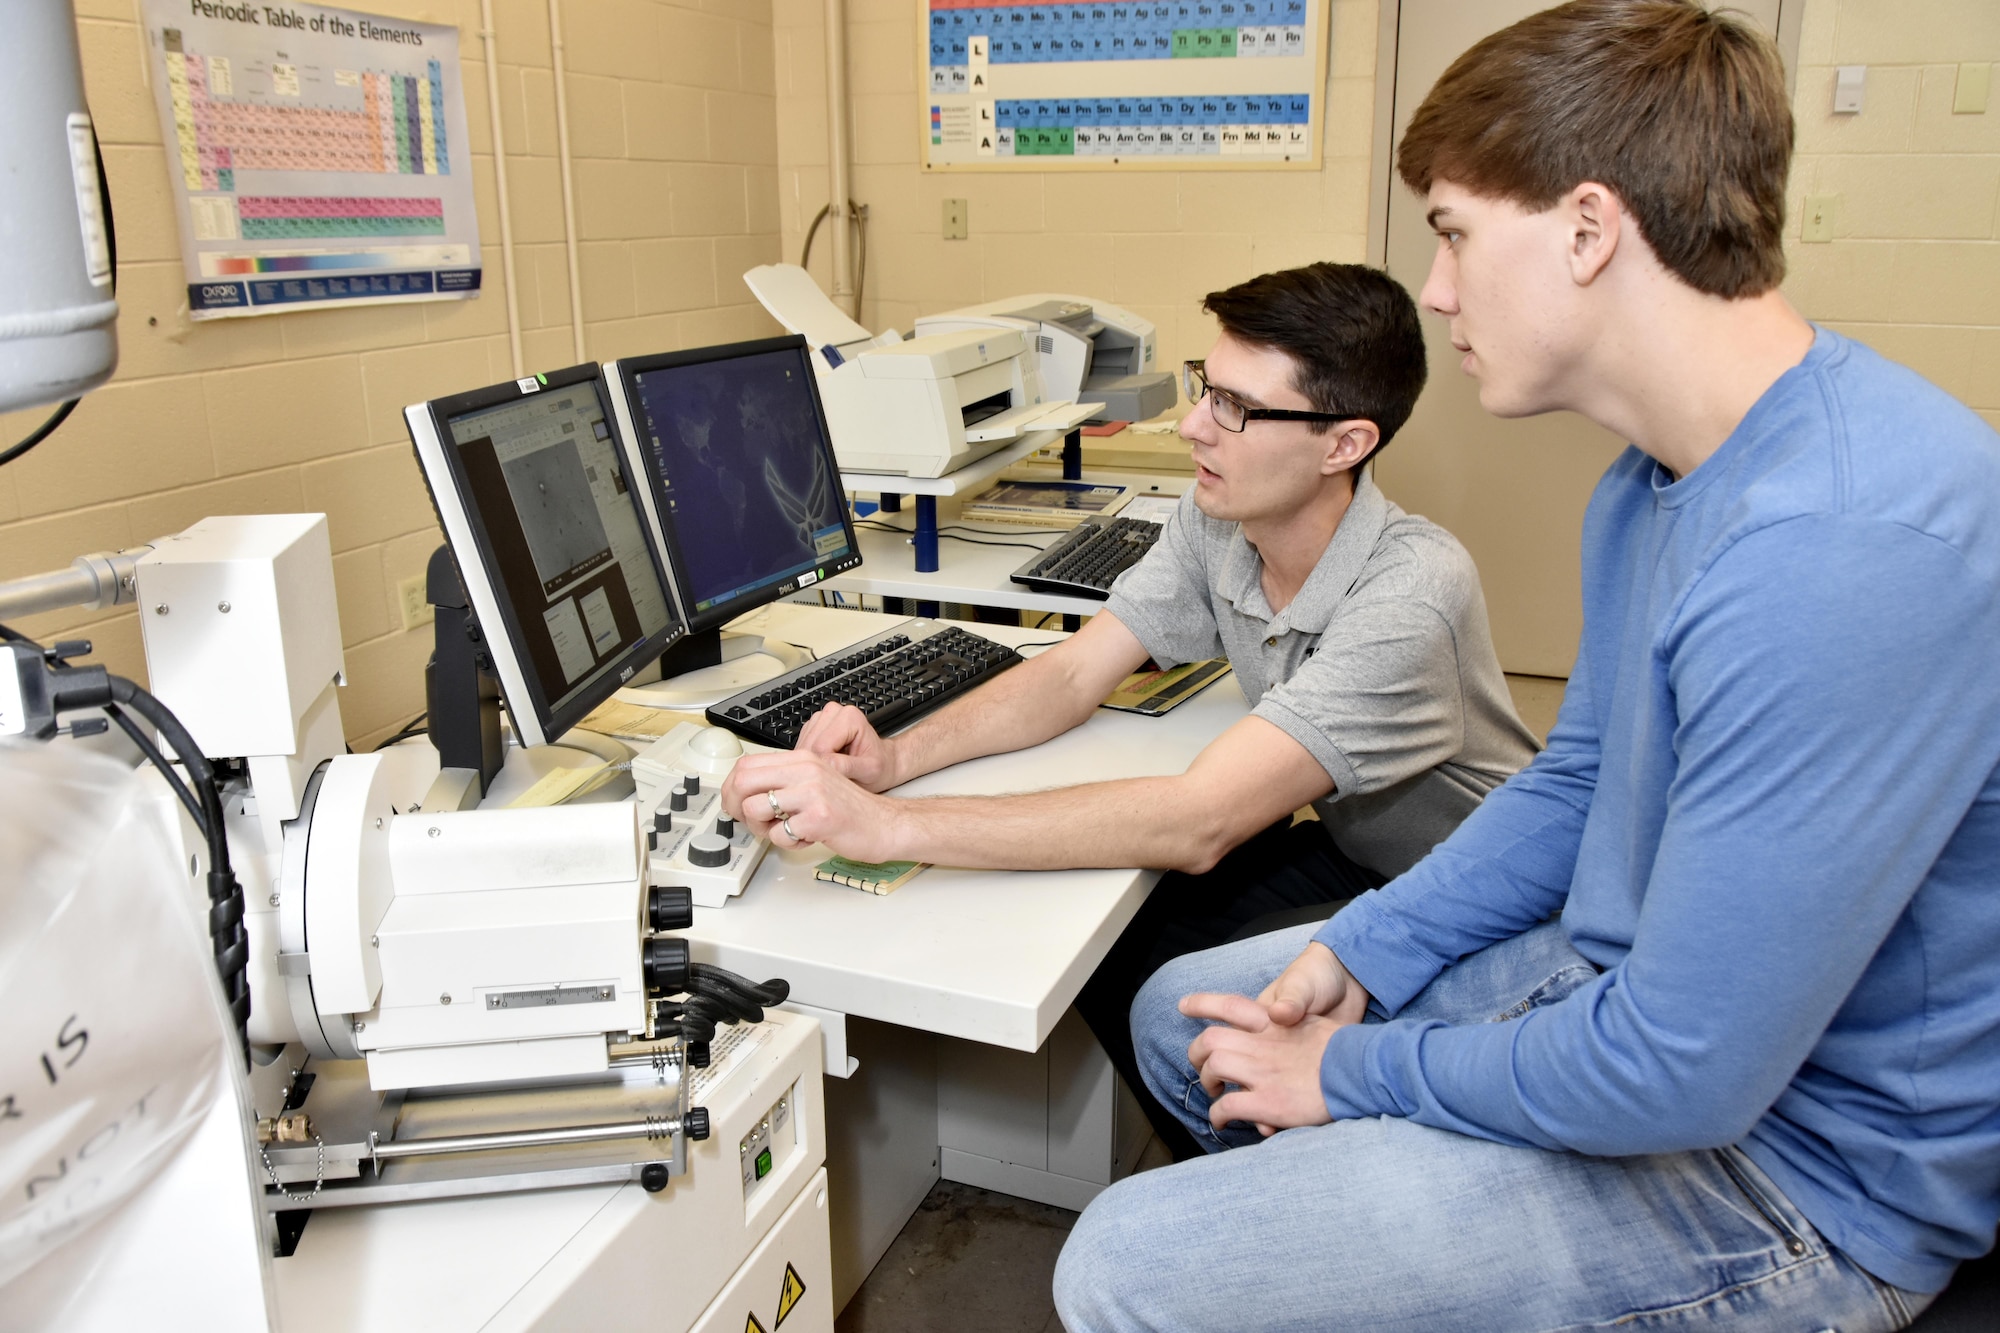 AEDC engineer Rylan Cox demonstrates the operation of an electron microscope to Franklin County High School student Collin Milliken he mentored as part of the Engineer for a Day program Feb. 22 at Arnold Air Force Base. Engineer for a Day, one of several 2017 Engineers Week activities during the week of Feb. 19-25, was held for area high school eleventh and twelfth grade students. After touring test facilities at the Complex, the group of 39 students had the chance to spend time with an engineer mentor in an area of their particular interest. (U.S. Air Force photo/Rick Goodfriend)